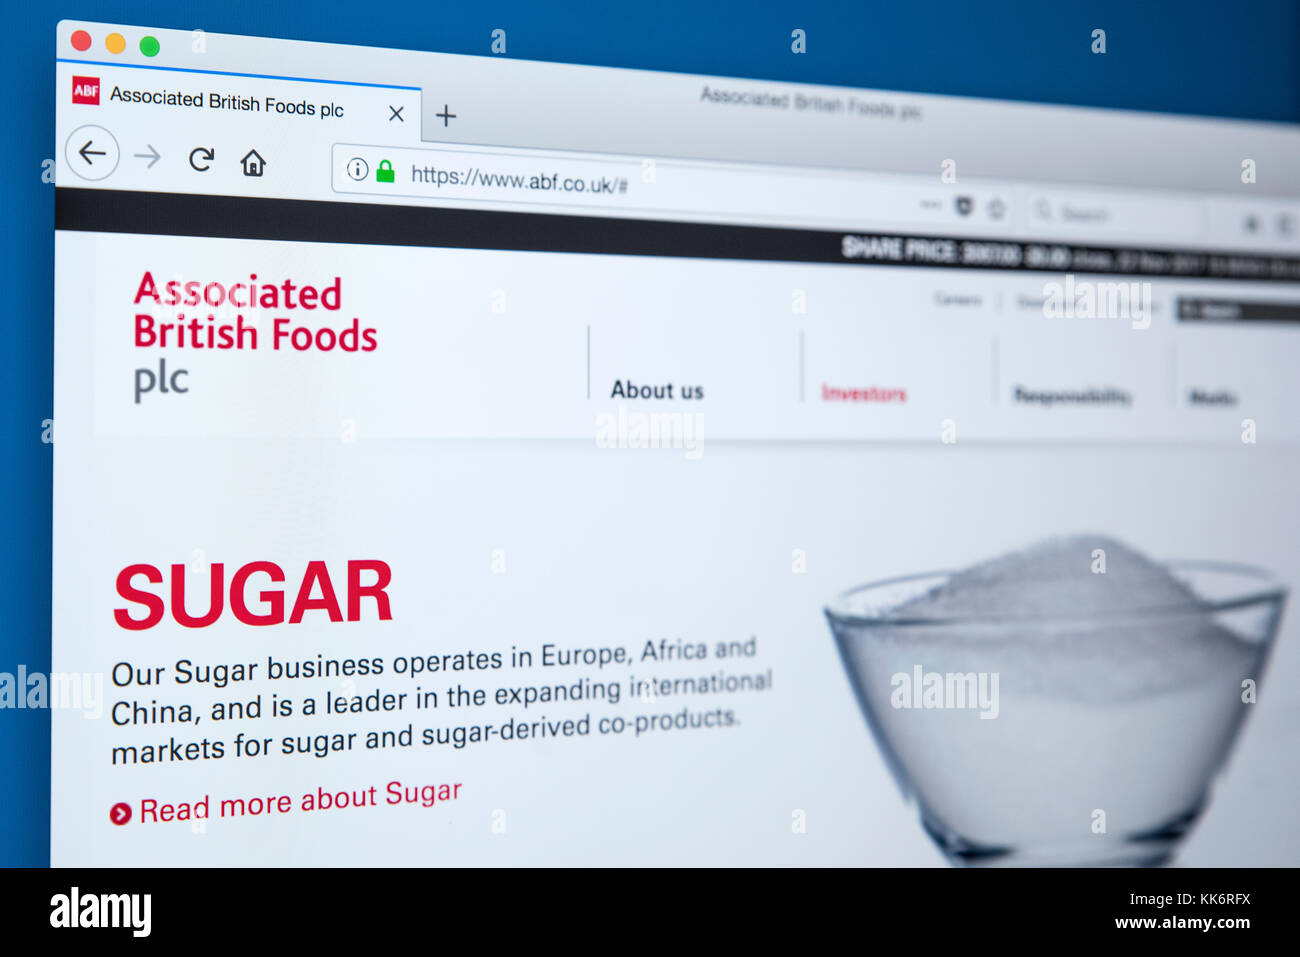 LONDON, UK - NOVEMBER 22ND 2017: The homepage of the official website for Associated British Foods plc - the British multinational food processing and Stock Photo